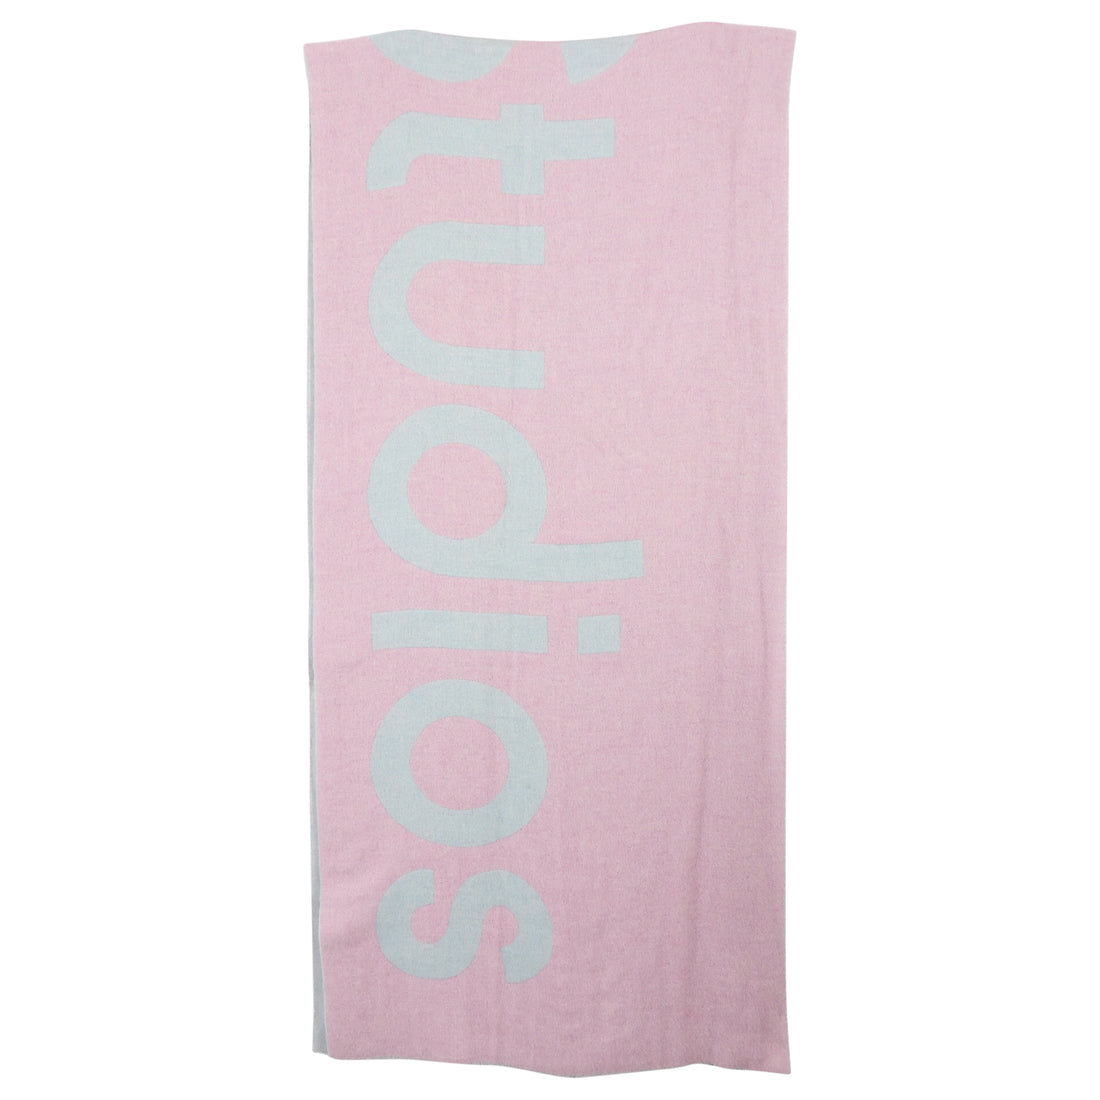 Acne Studios Large Pink and Blue Logo Scarf